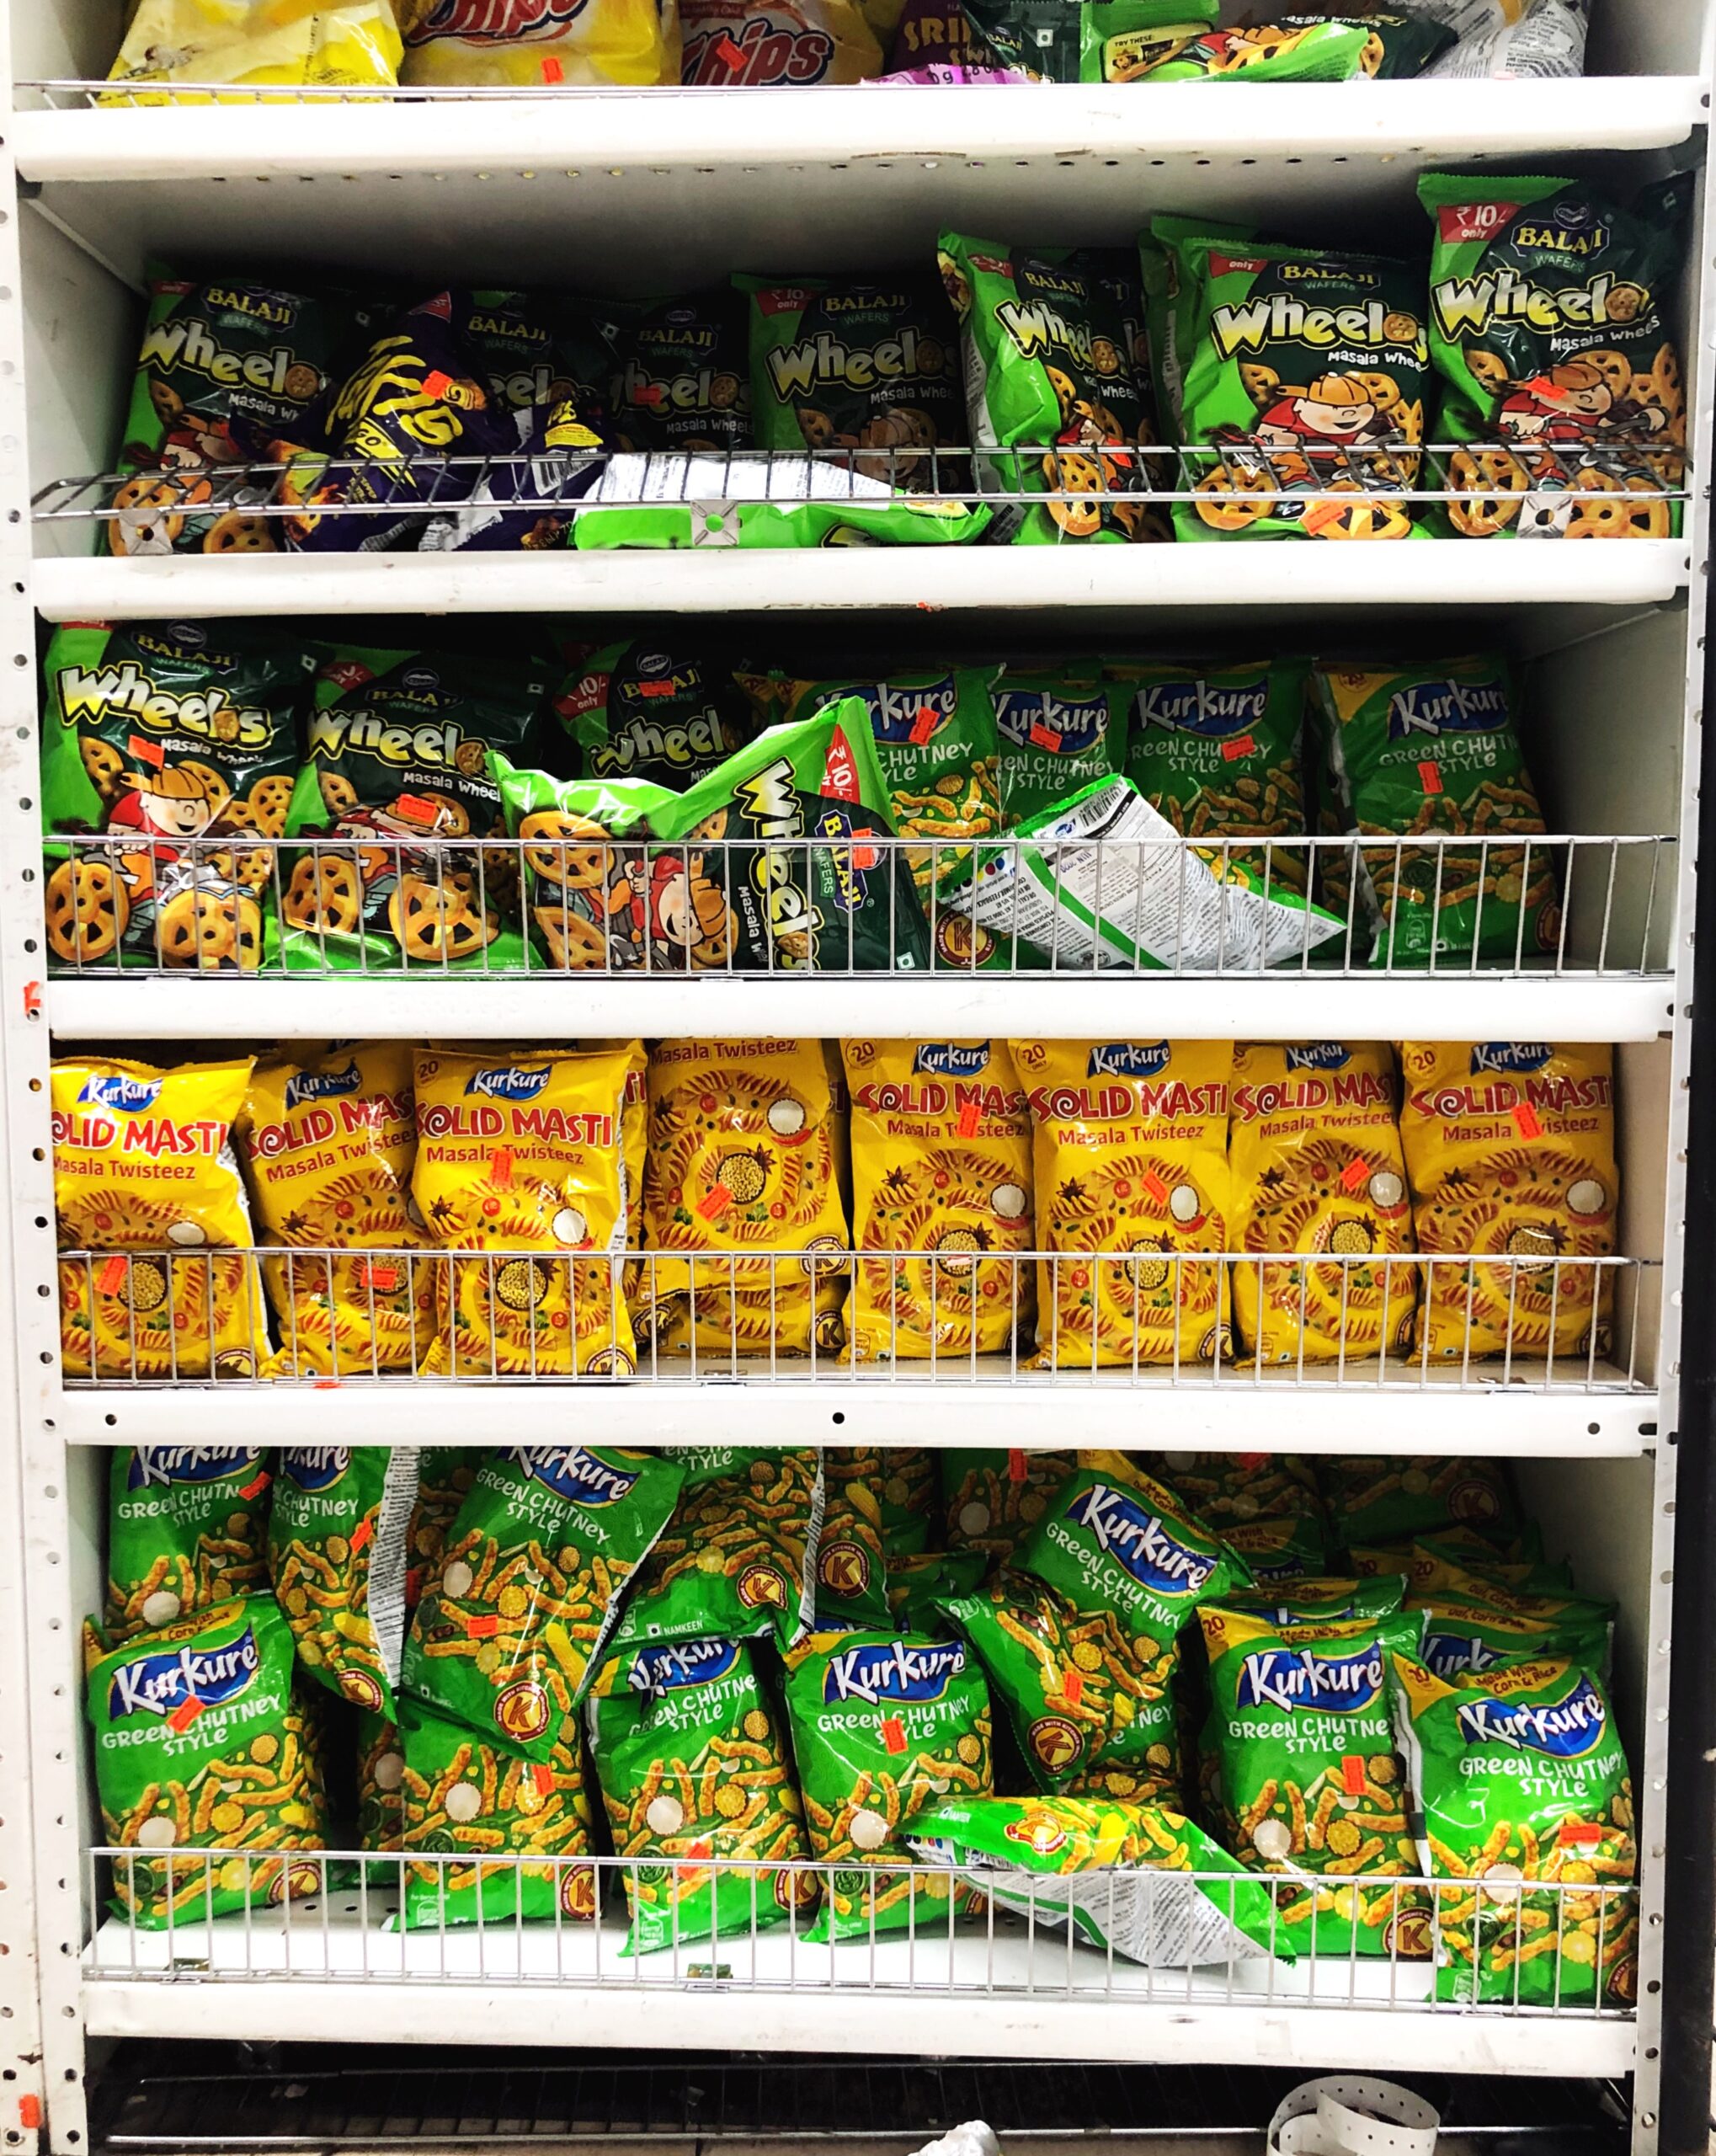 India Bags of Snack Foods at Patel Brother Grocery Store